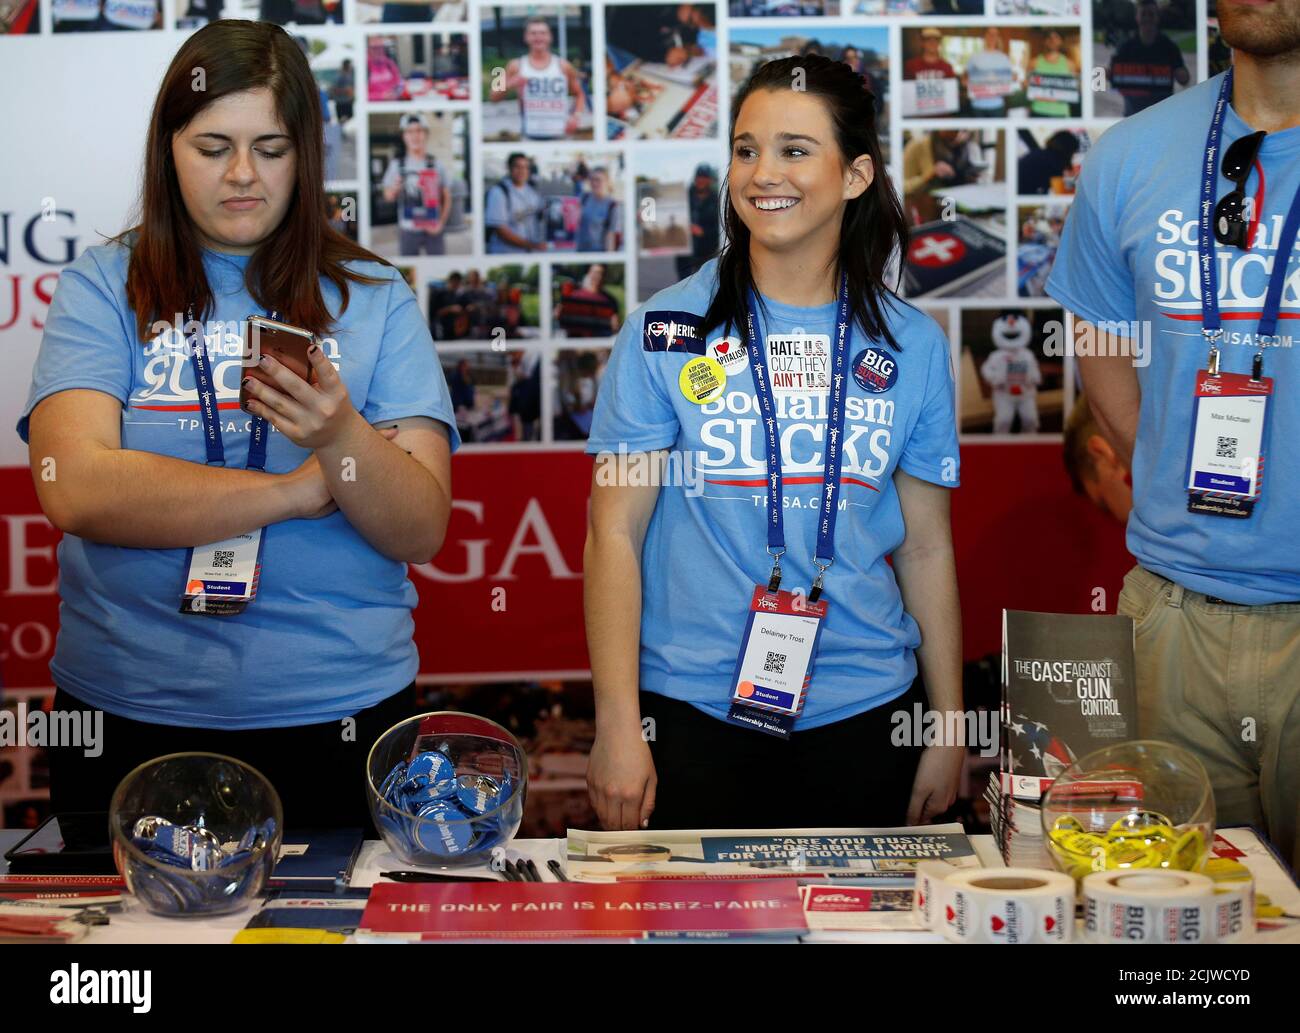 Volunteers at the Turning Point USA booth wait to speak with people attending the Conservative Political Action Conference (CPAC) in National Harbor, Maryland, U.S., February 23, 2017.      REUTERS/Joshua Roberts Stock Photo